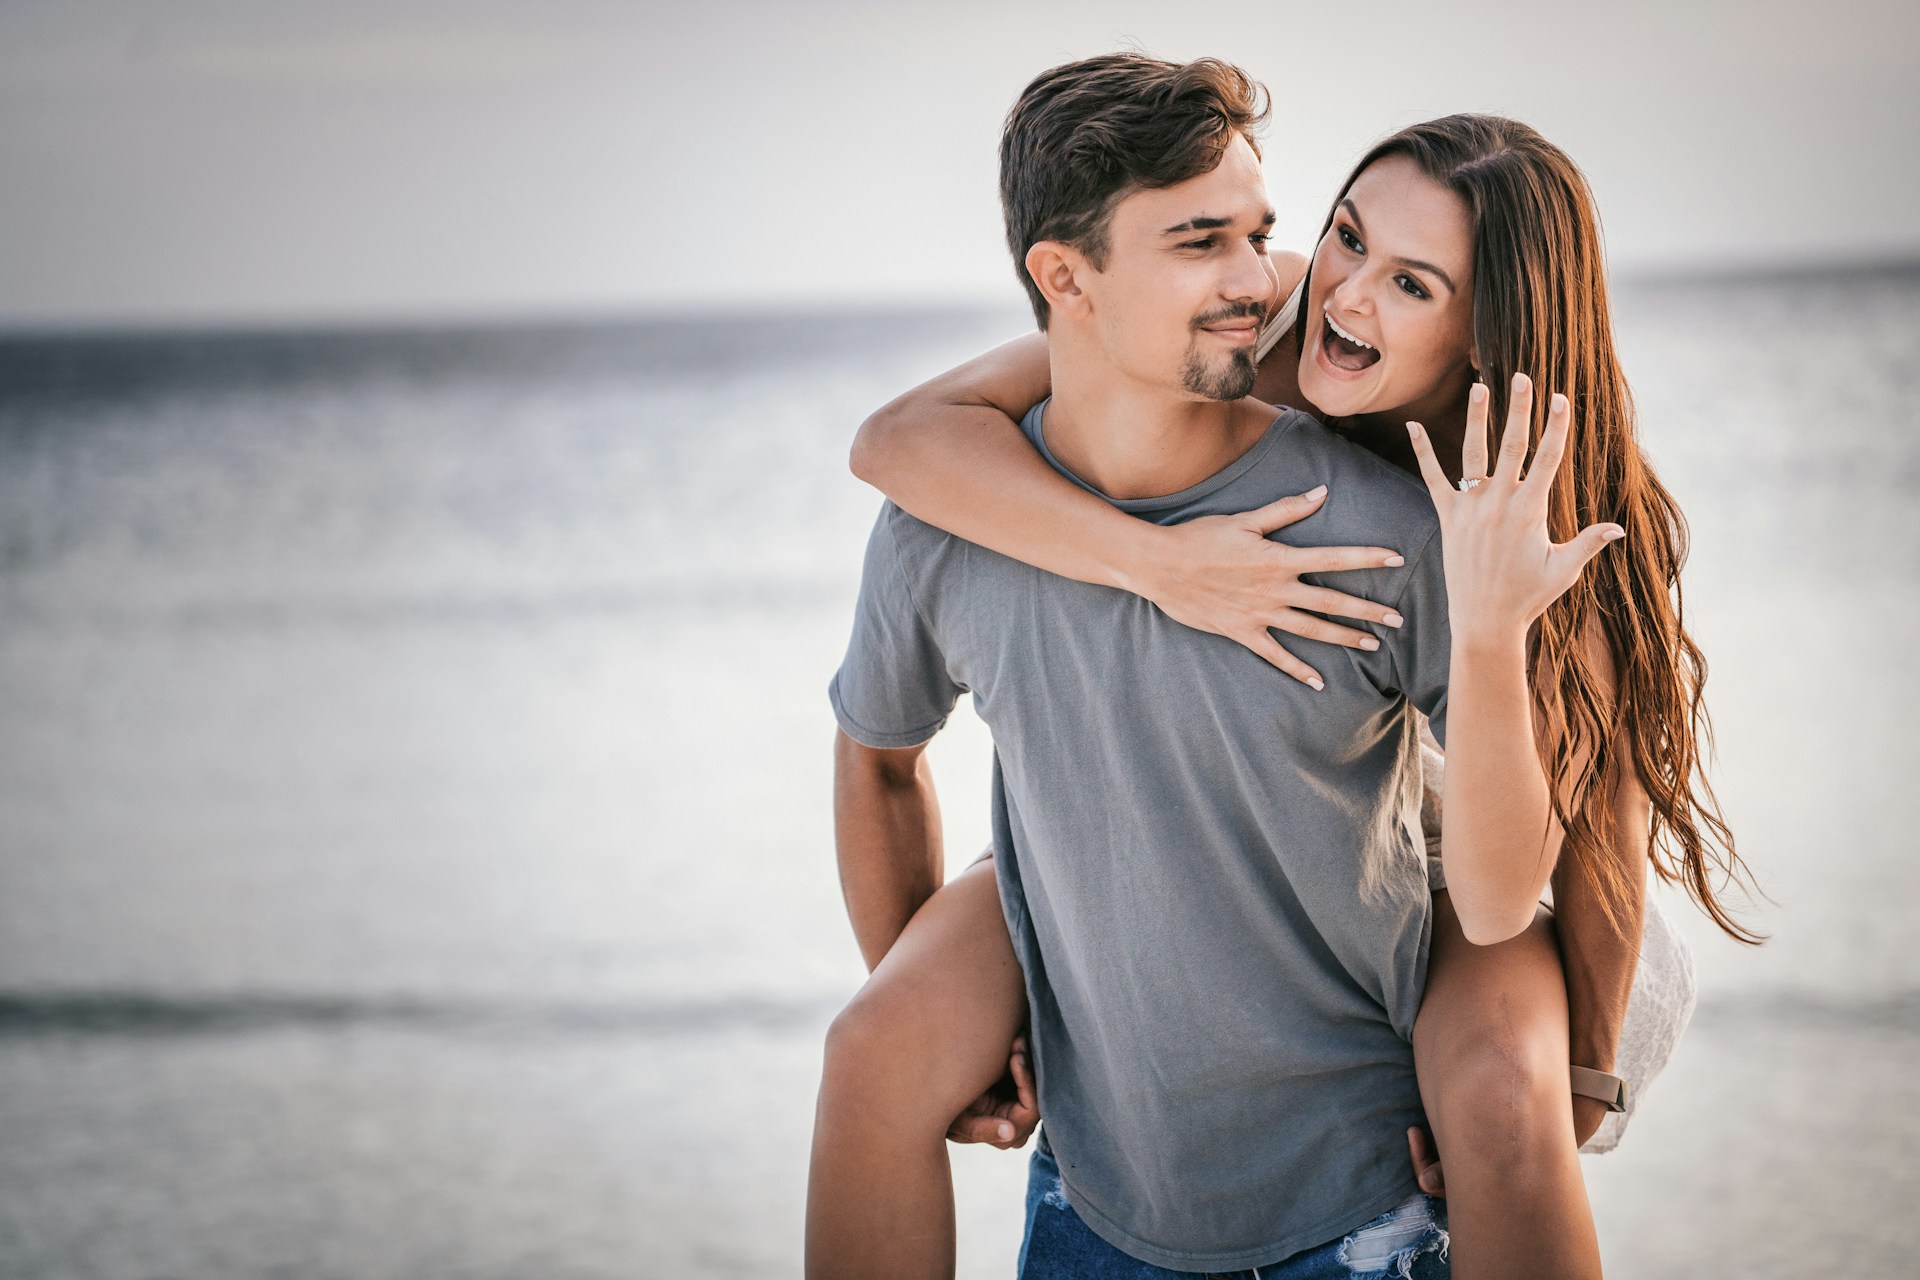 lady riding on a man’s back on the beach smiling with an engagement ring